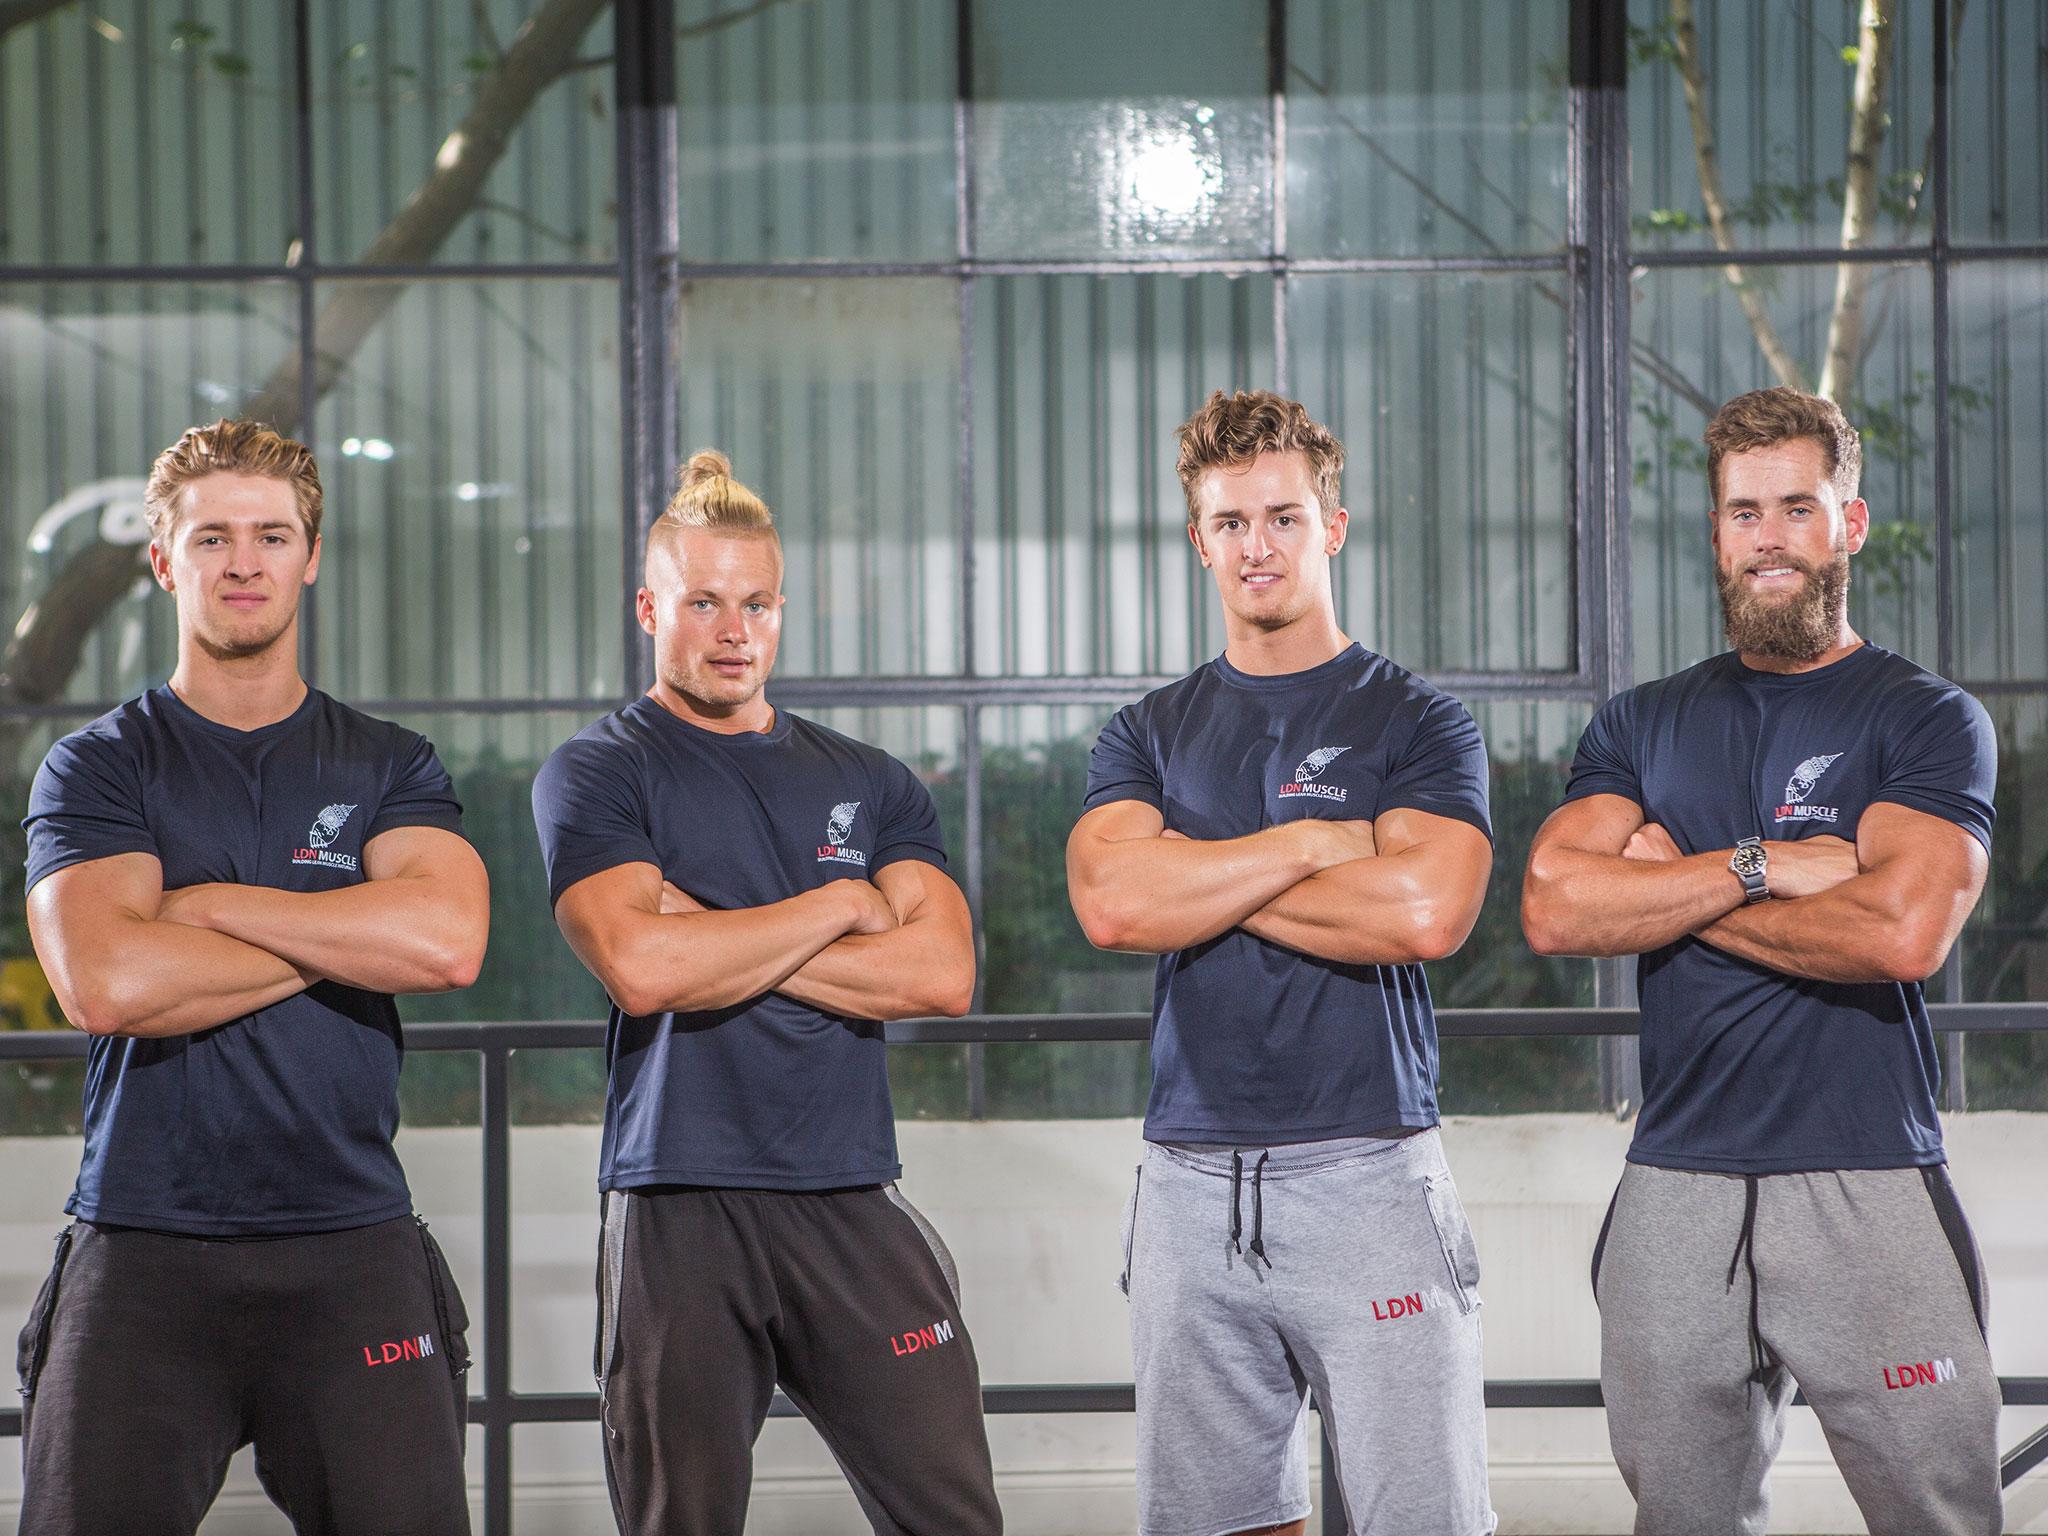 LDNM is now one of the leading providers of training and nutrition guides